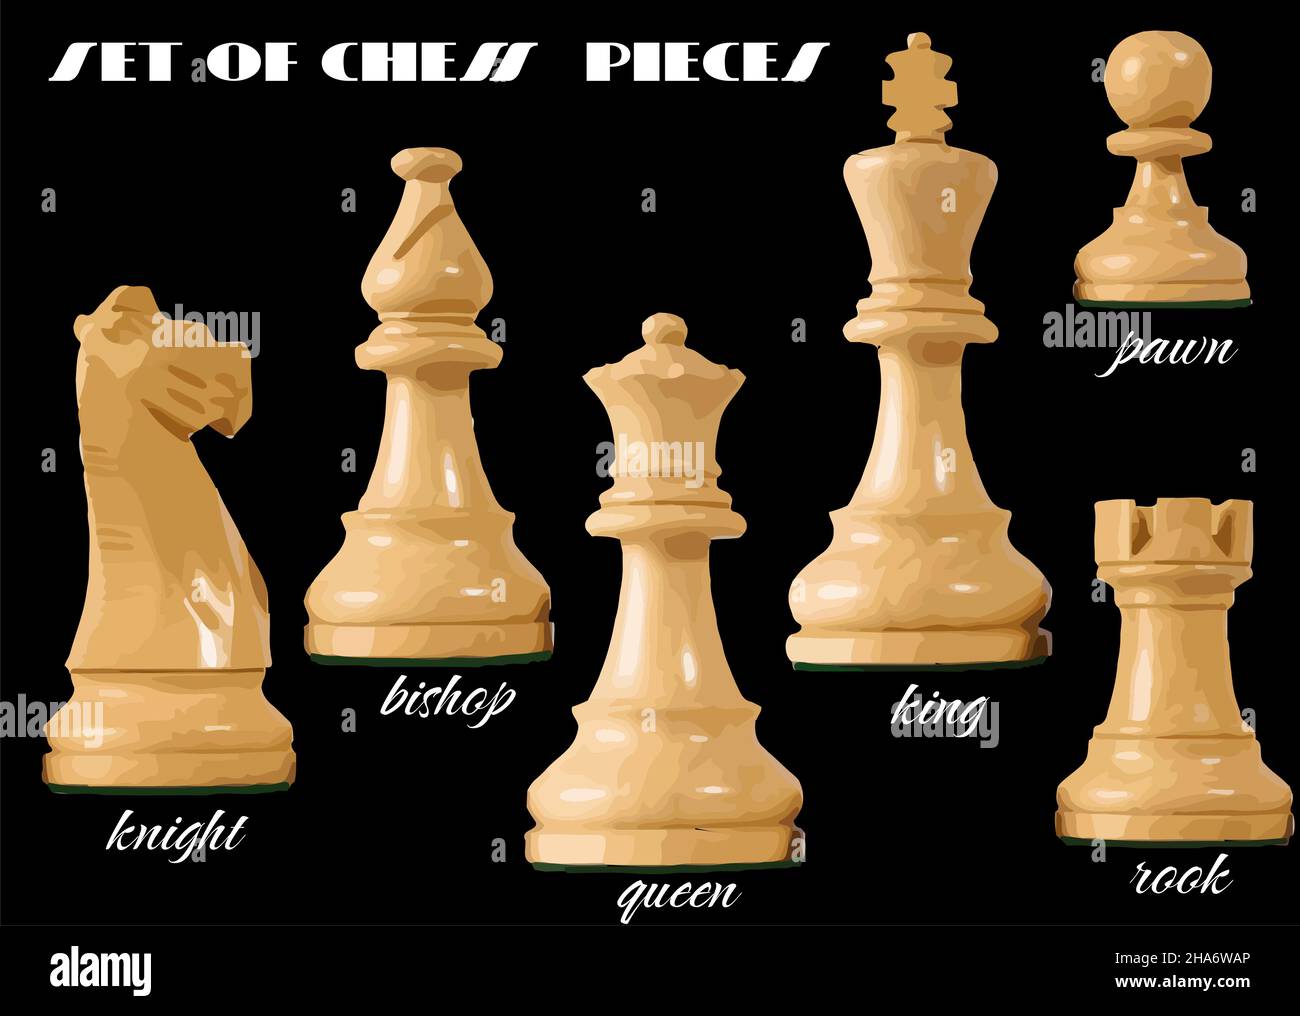 Two Rows Of Chess Pieces High-Res Vector Graphic - Getty Images